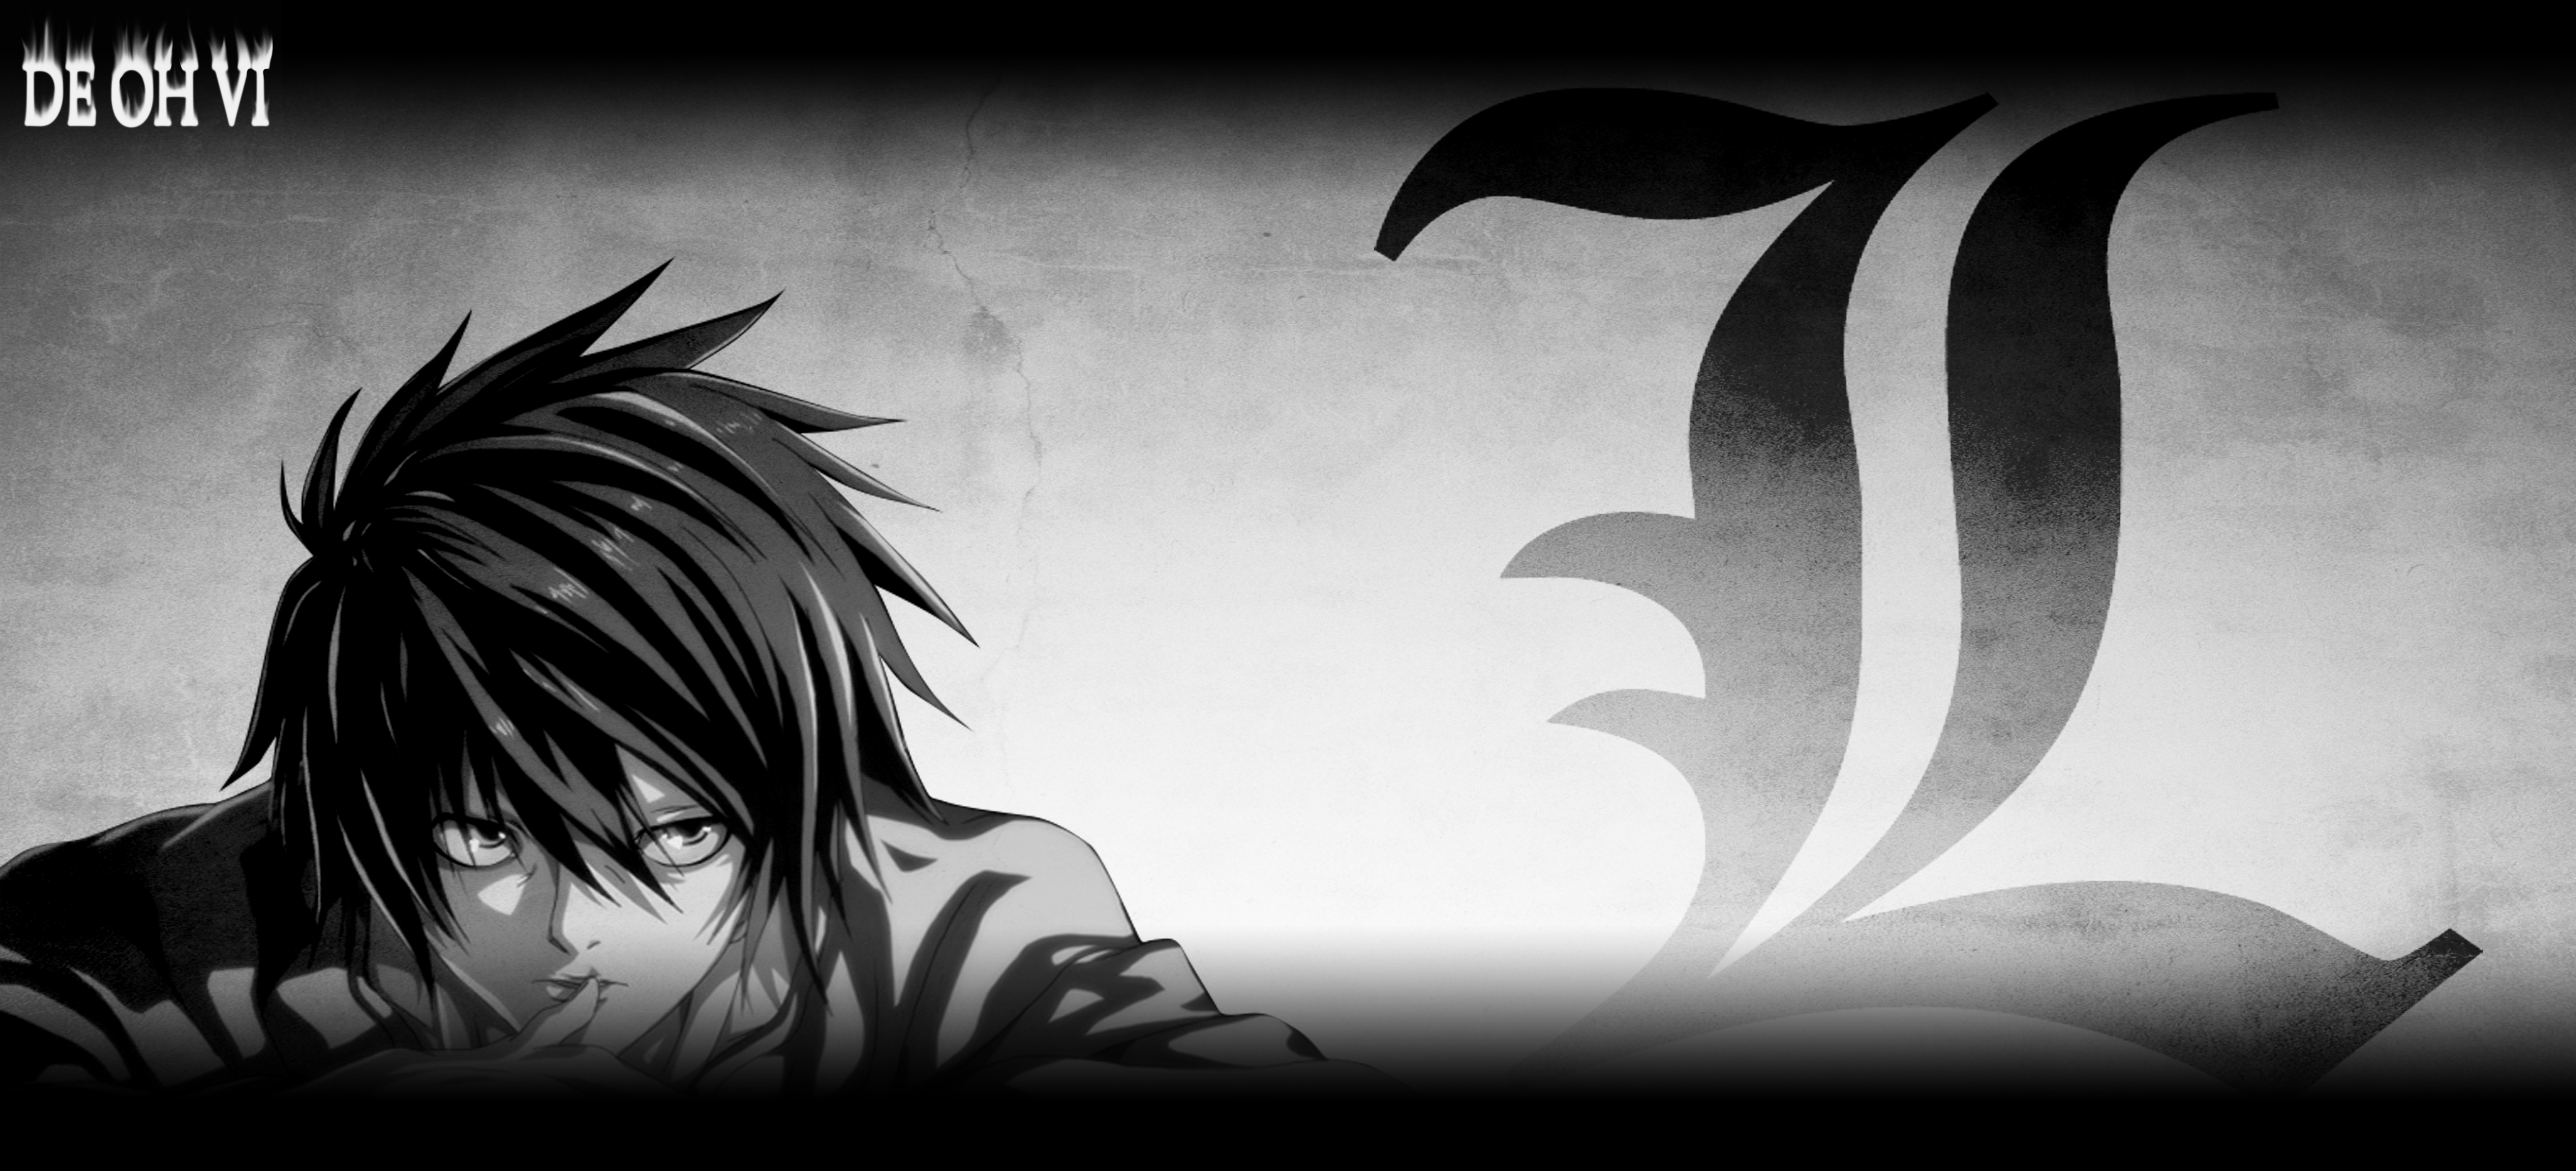 Death Note Wallpapers High Quality Download Free